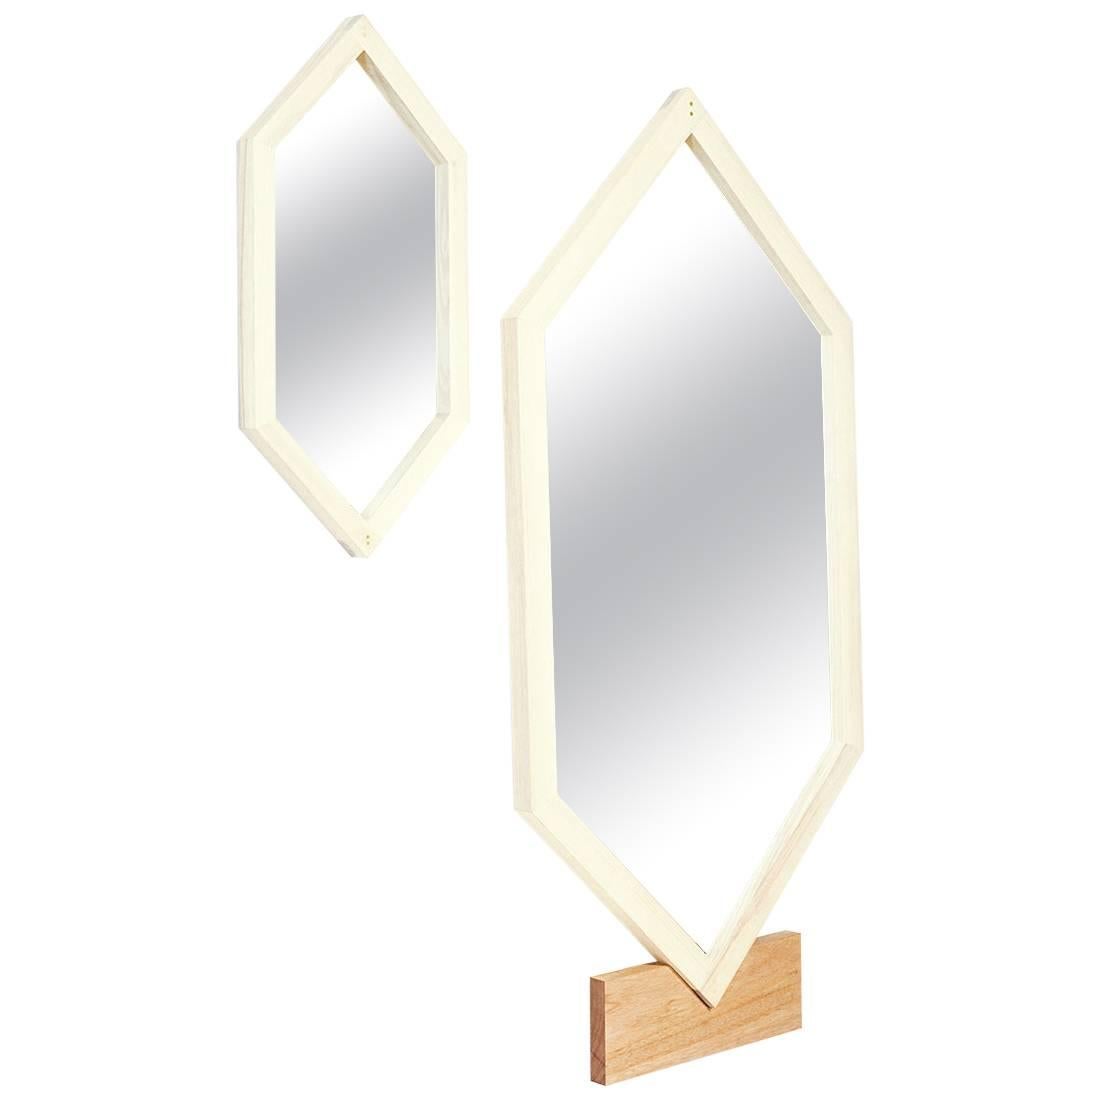 Melnikov Mirror by Dane Co. - Customizable sizes and finishes For Sale